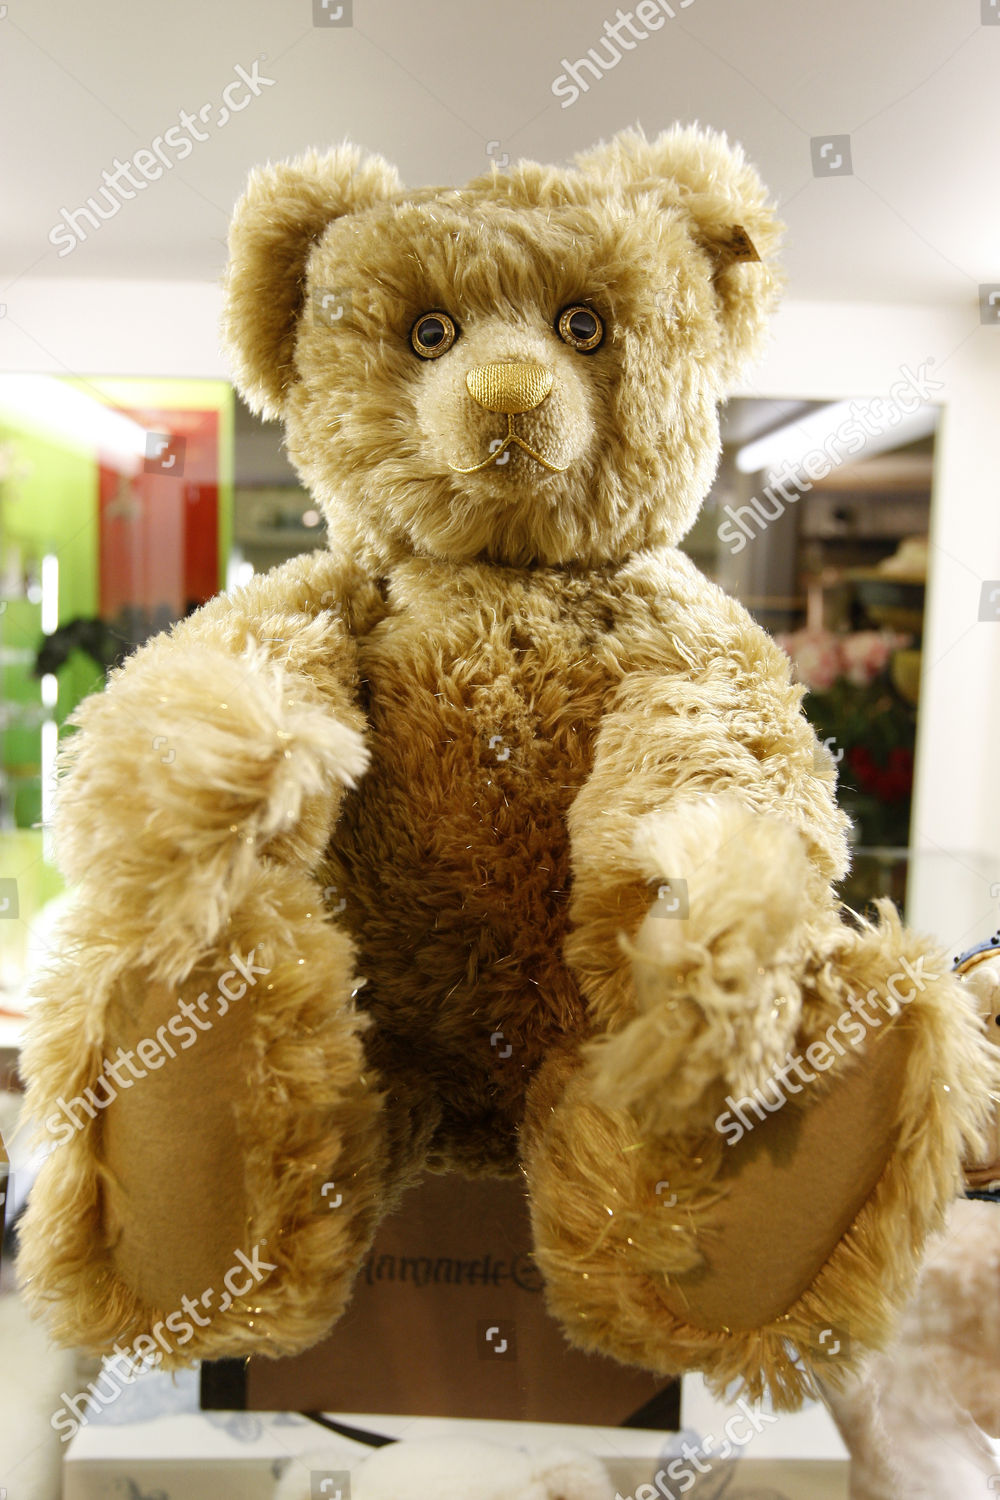 most expensive teddy bear in the world